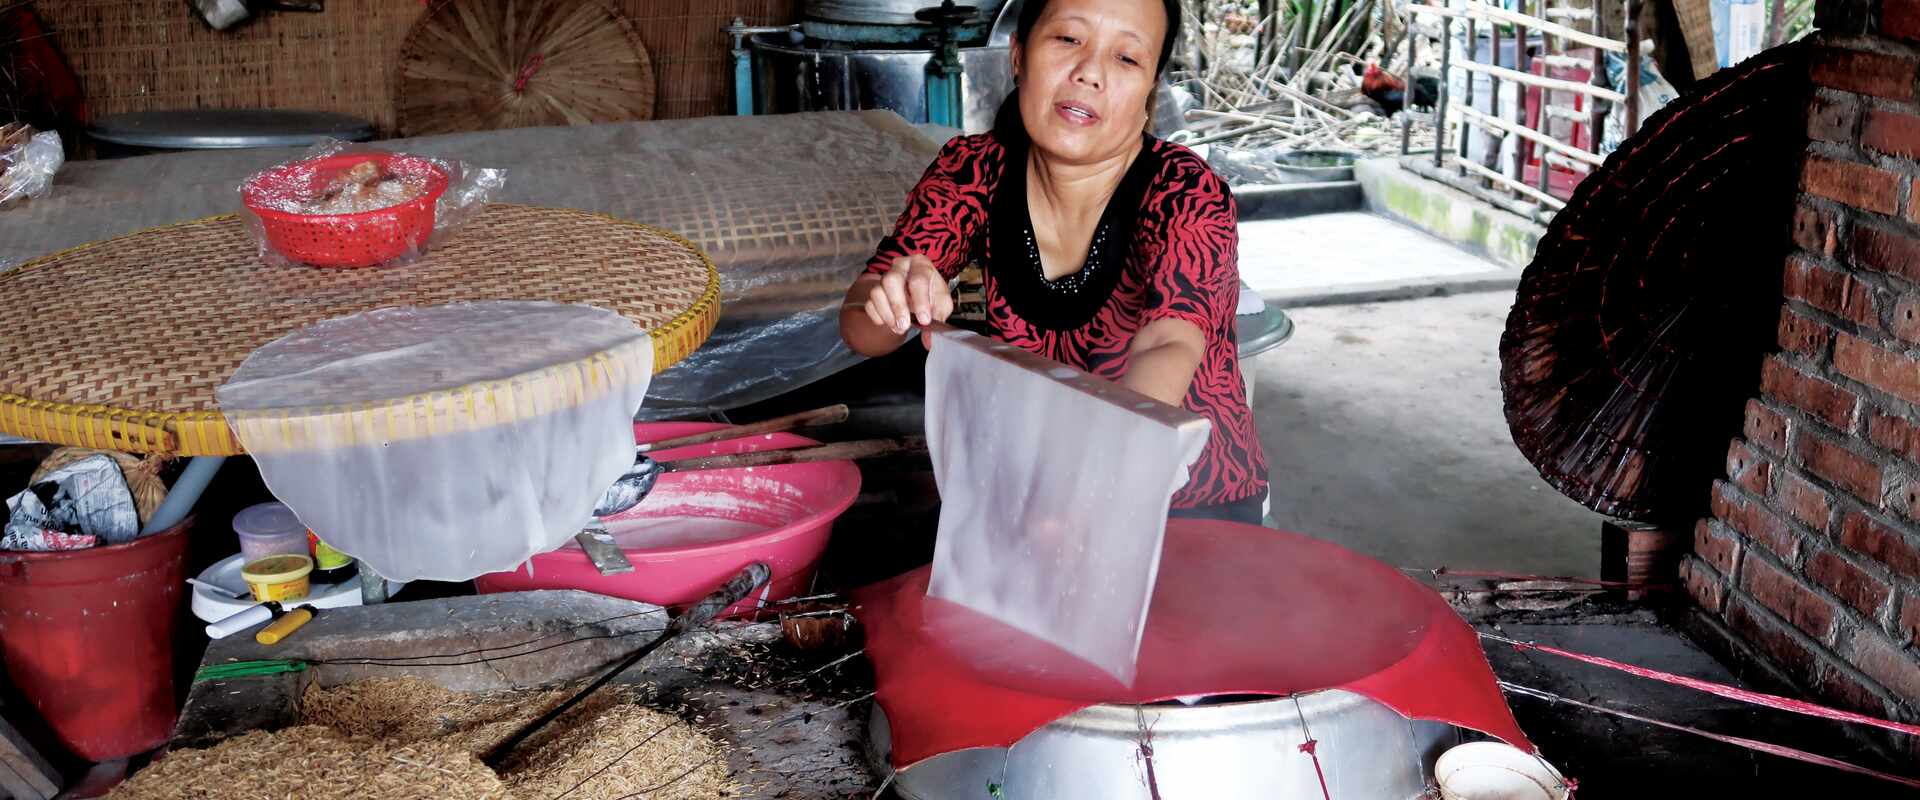 cai be rice paper coconut candy lady in kitchen